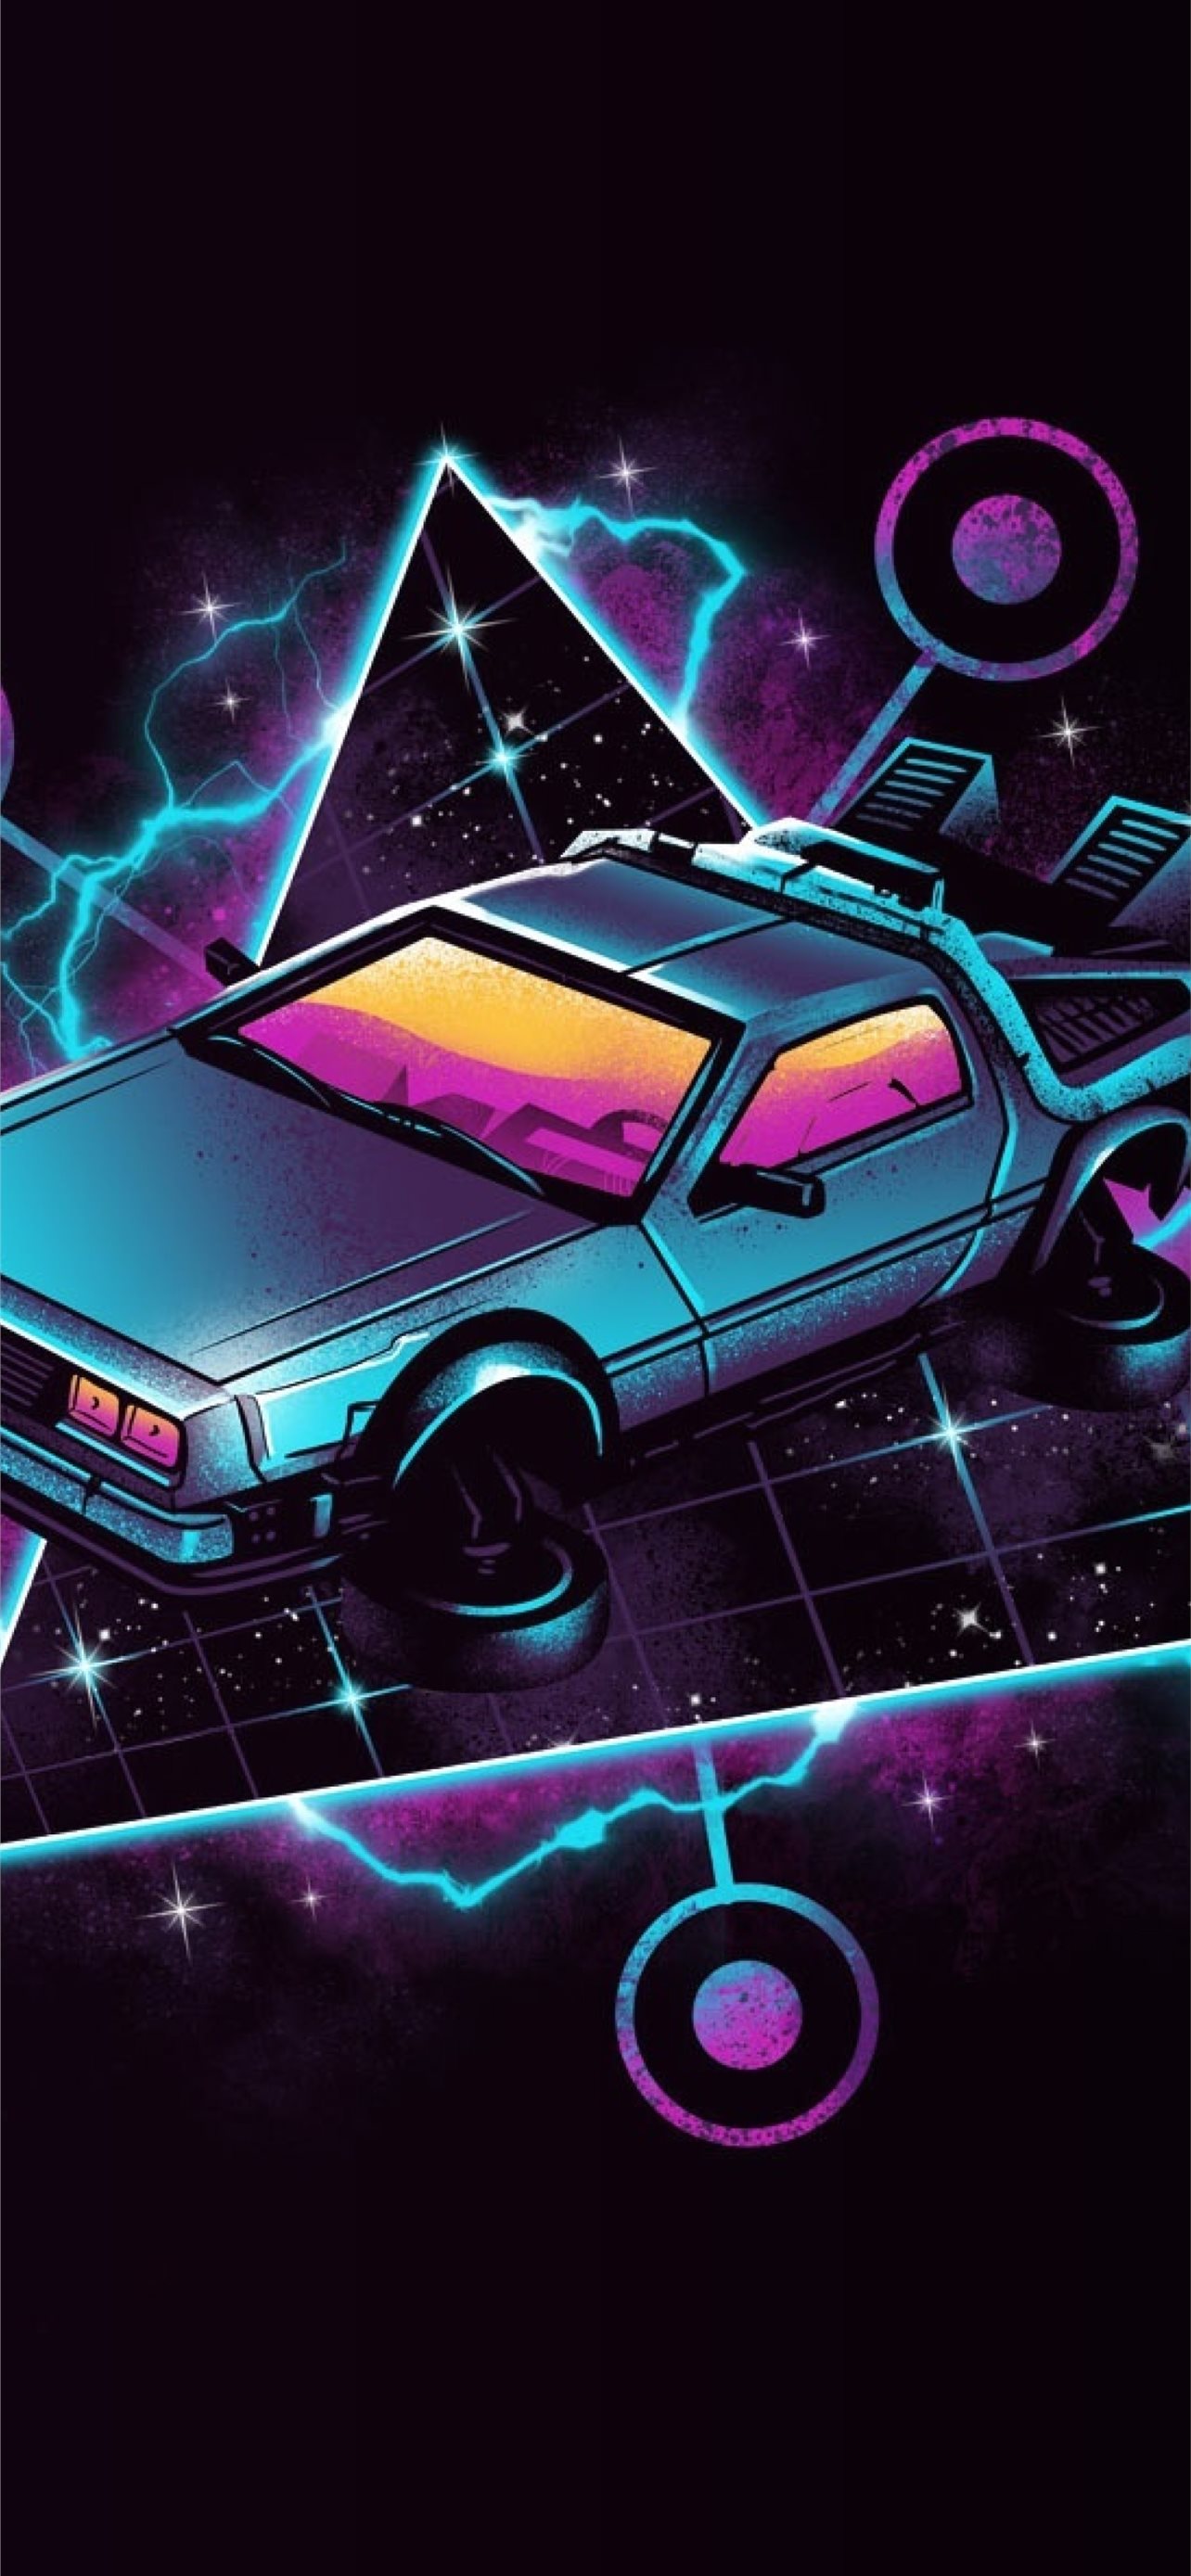 Back to the Future Movie Artwork Resolution HD Art. iPhone Wallpaper Free Download